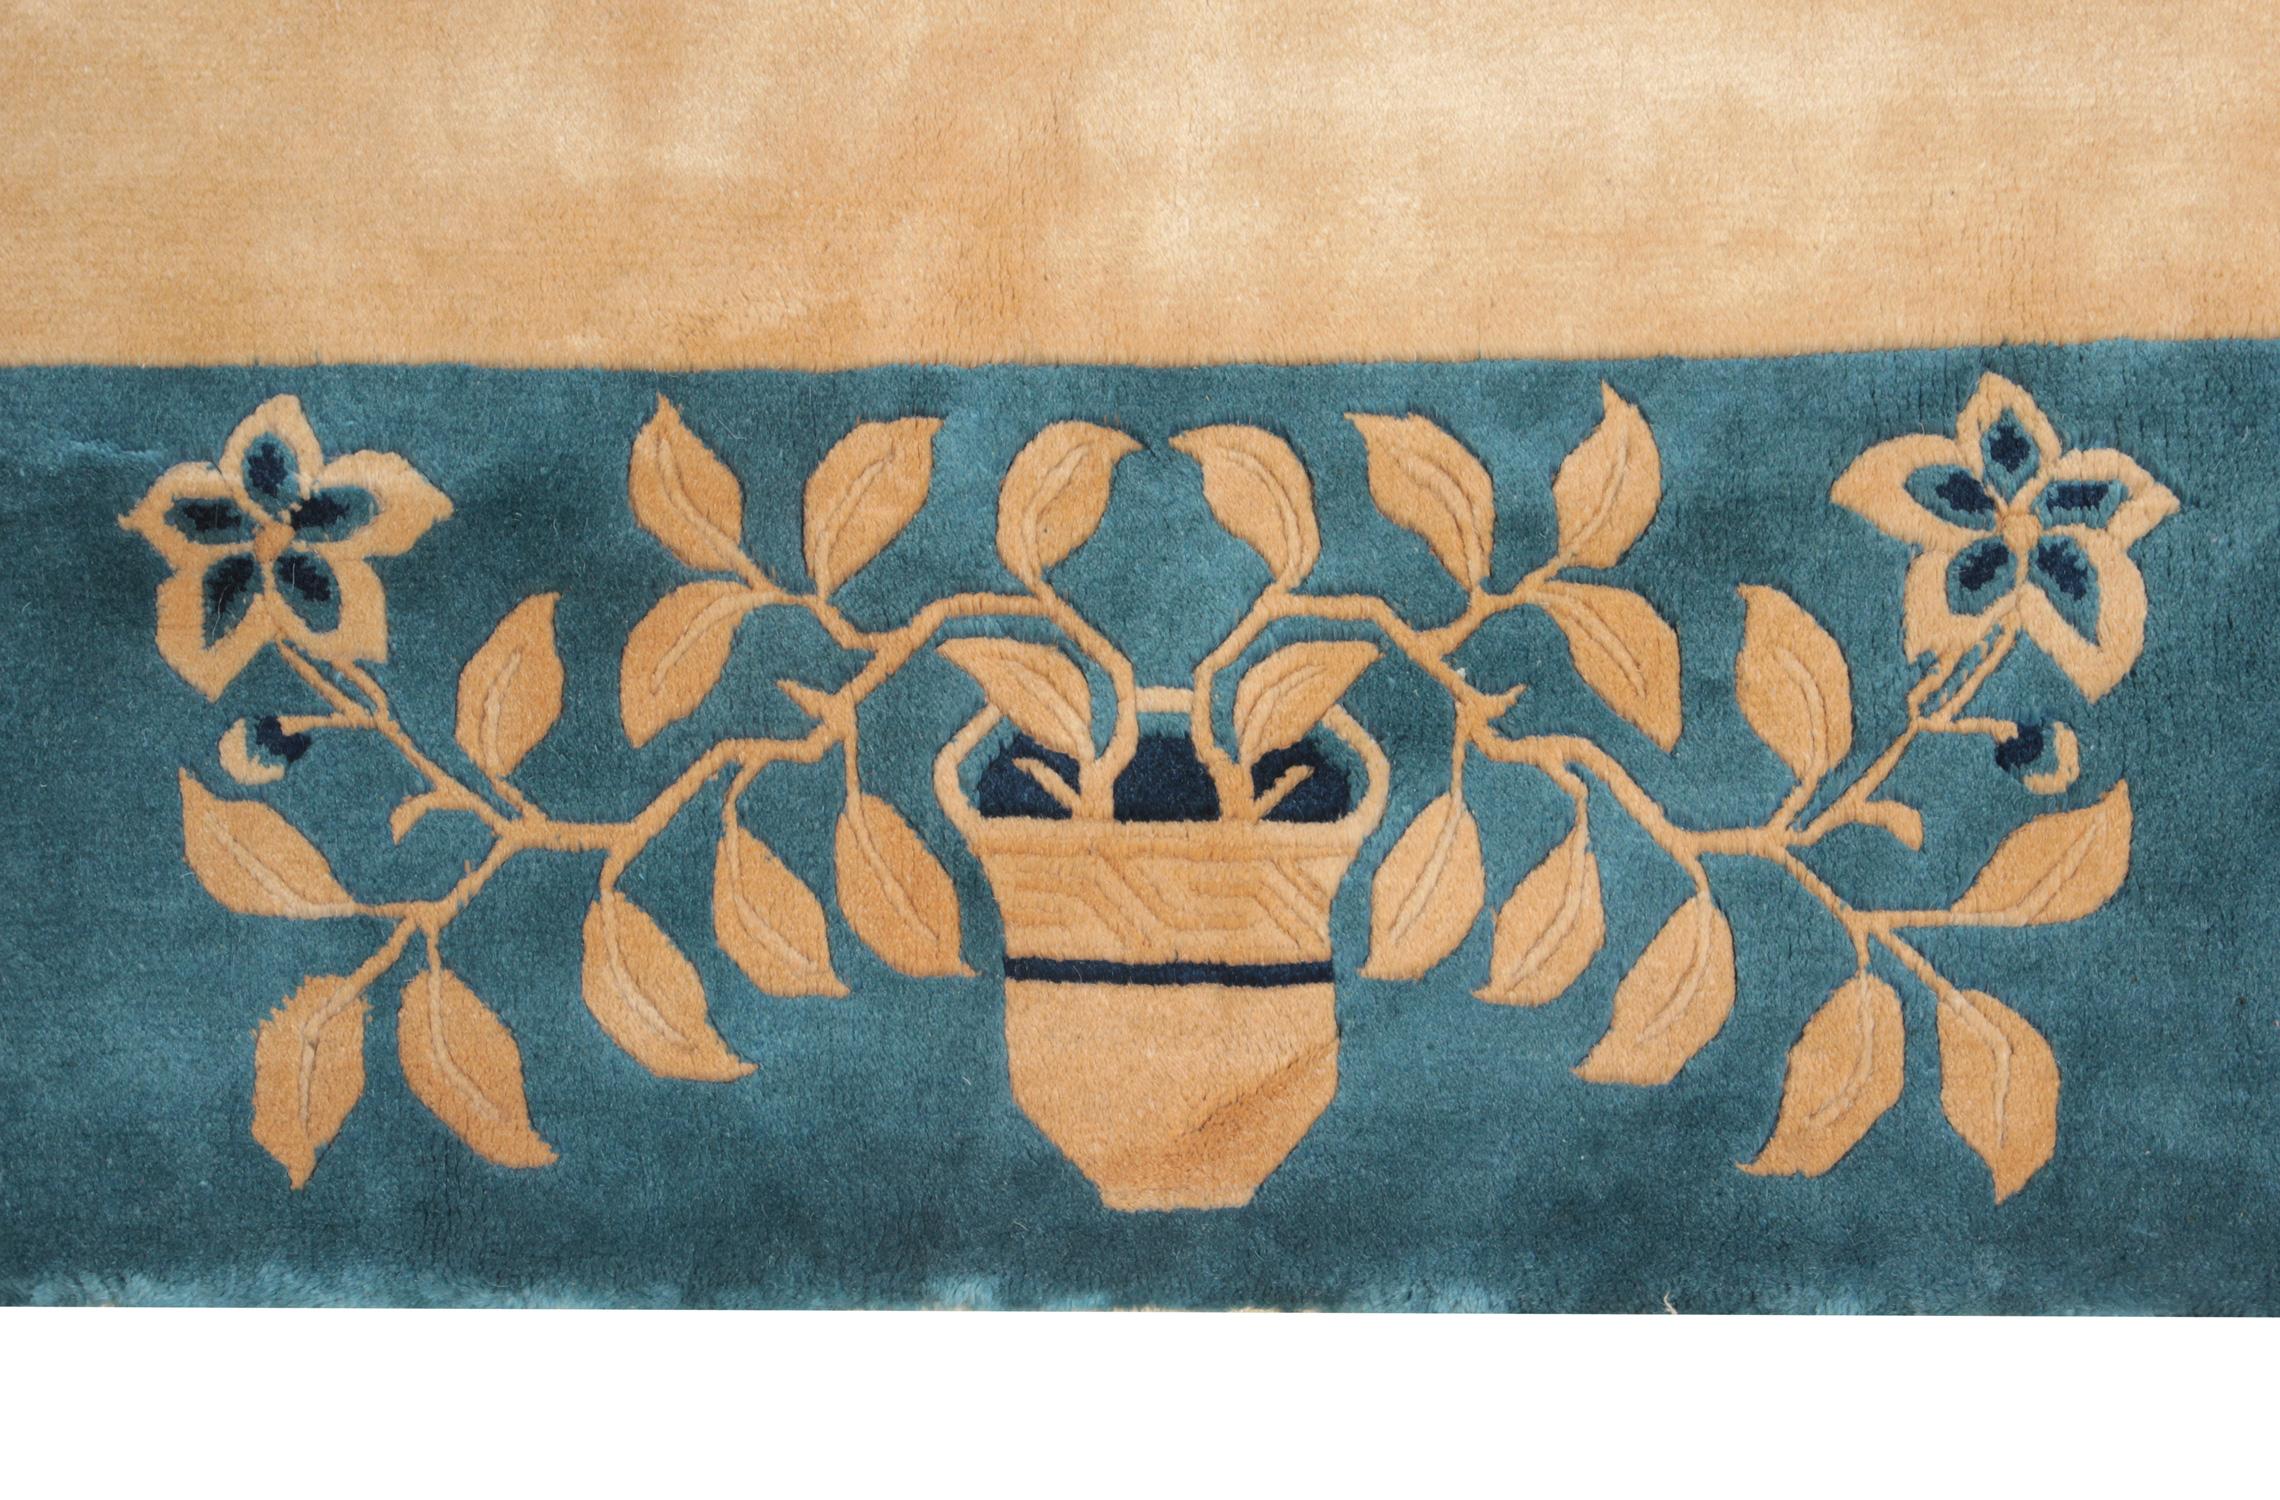 Vegetable Dyed Antique Art Deco Chinese Rugs, Beige and Blue Floral Carpet Rugs